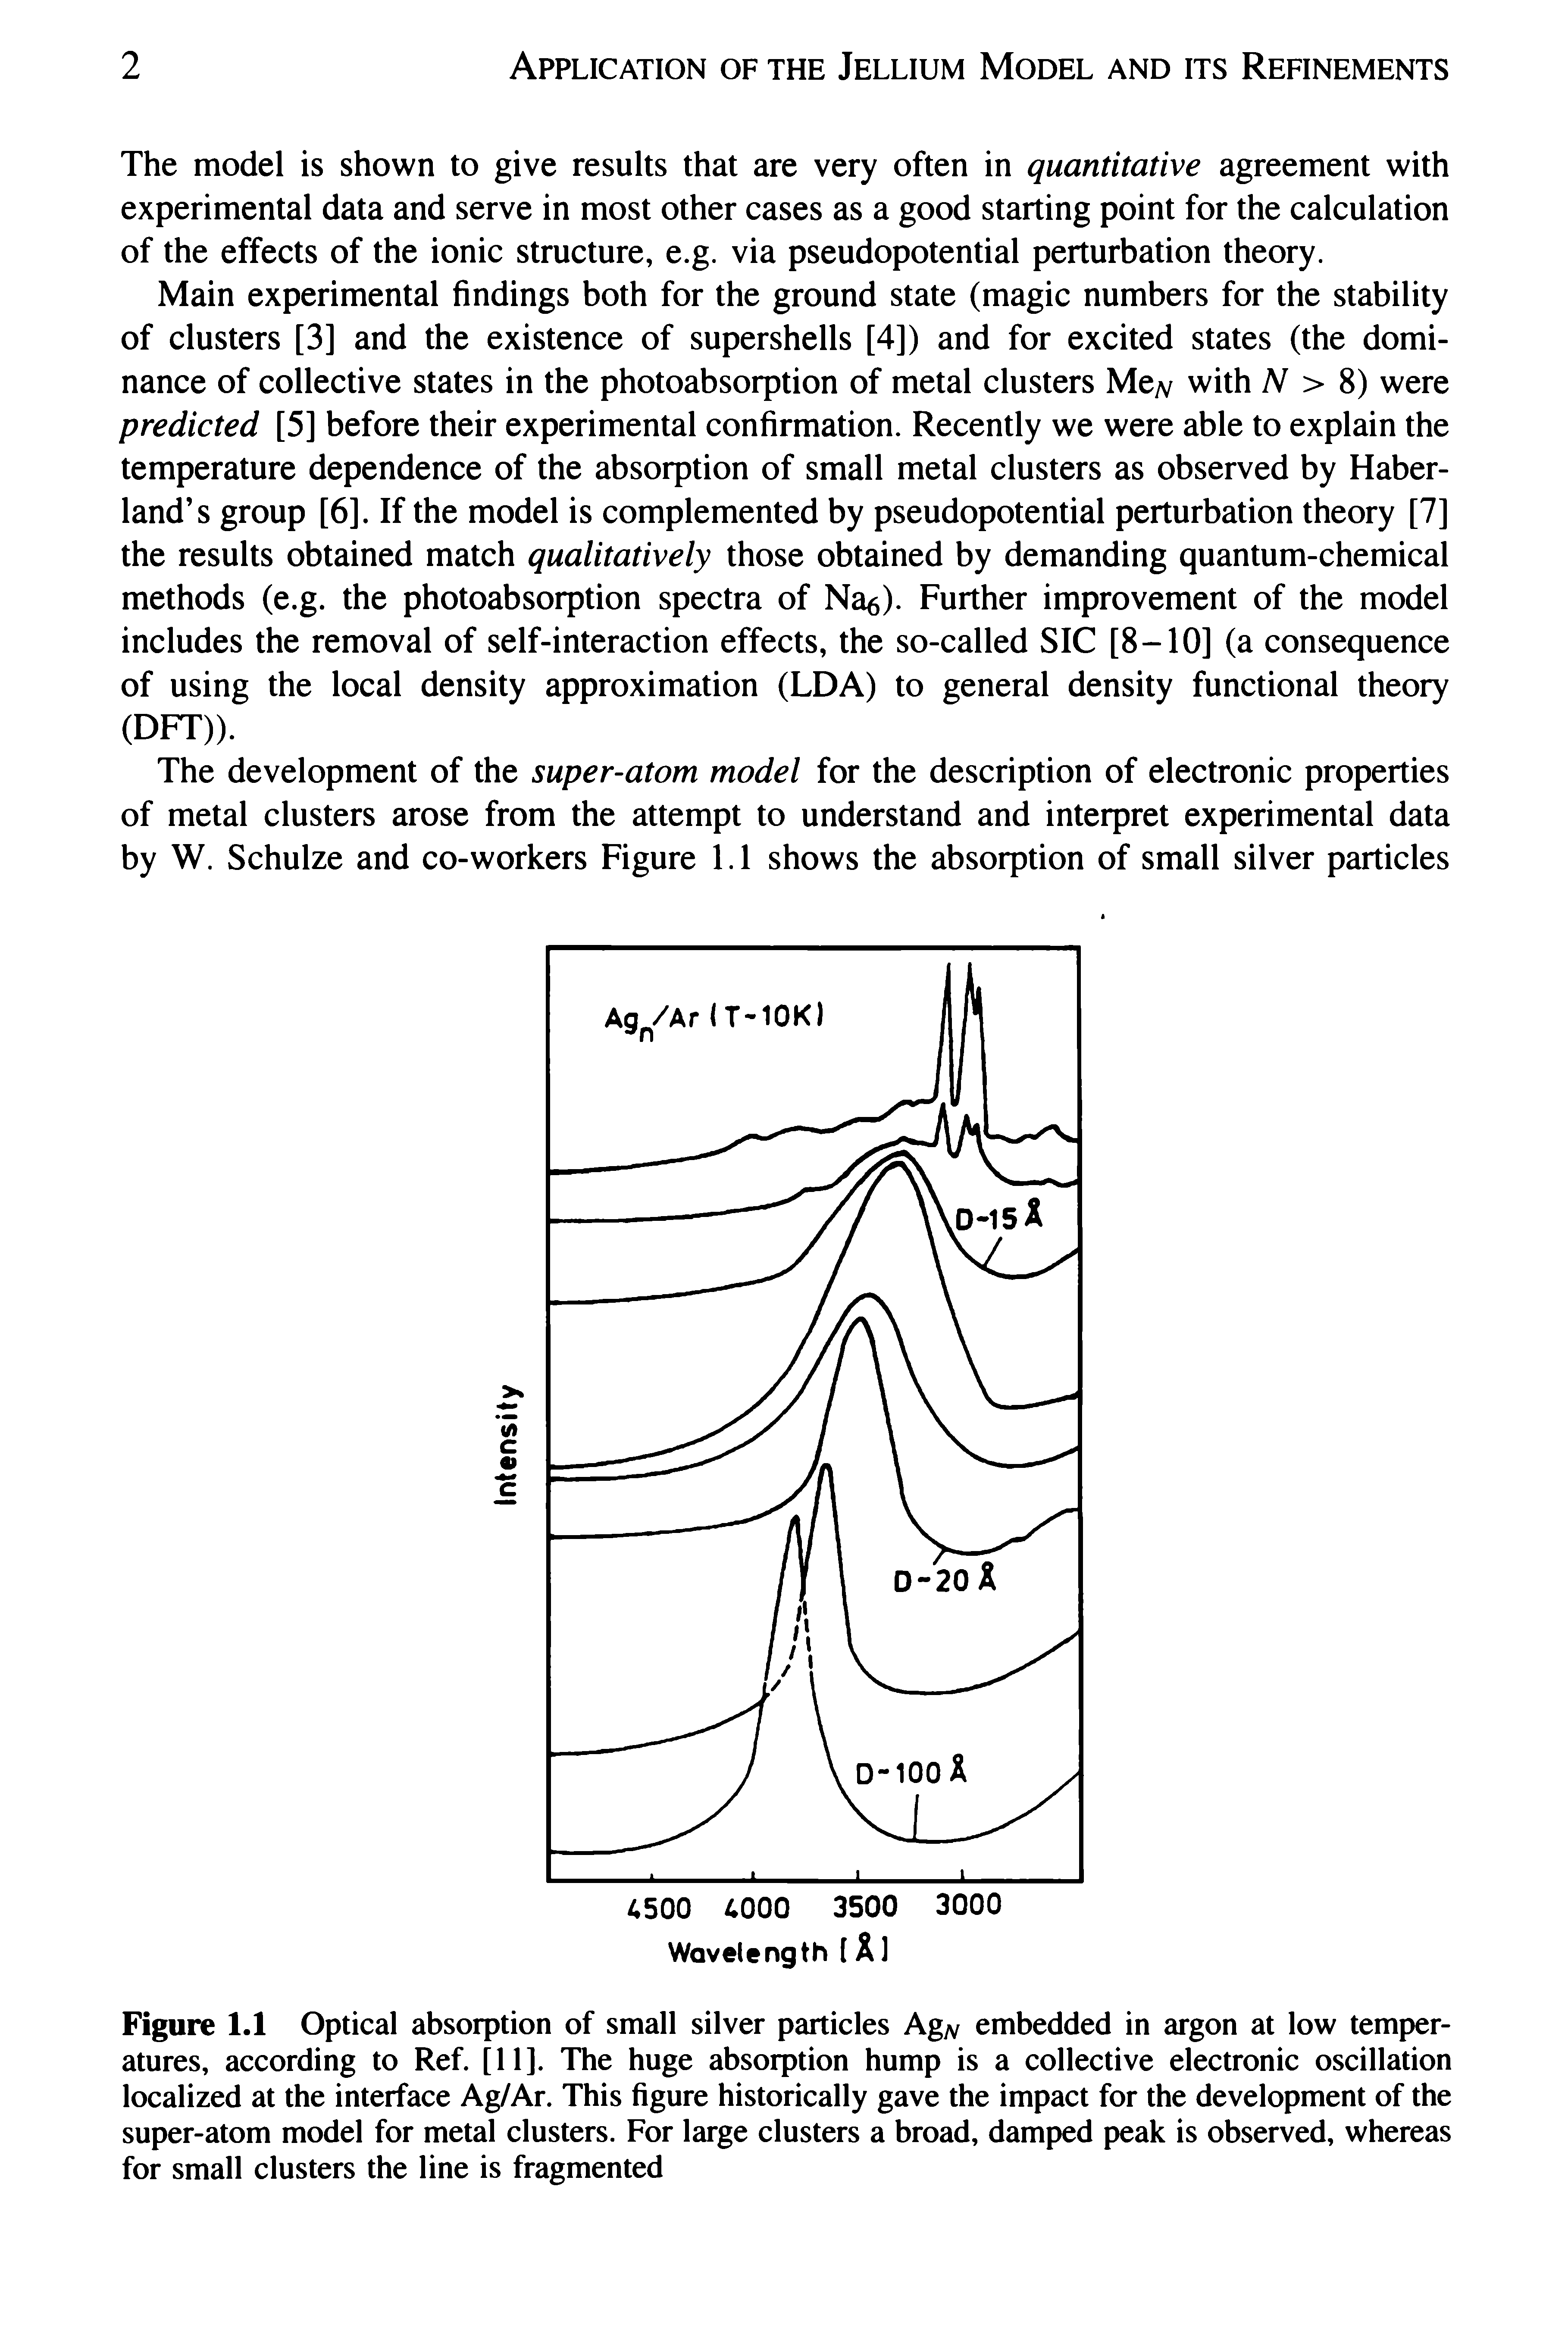 Figure 1.1 Optical absorption of small silver particles Ag embedded in argon at low temperatures, according to Ref. [11]. The huge absorption hump is a collective electronic oscillation localized at the interface Ag/Ar. This figure historically gave the impact for the development of the super-atom model for metal clusters. For large clusters a broad, damped peak is observed, whereas for small clusters the line is fragmented...